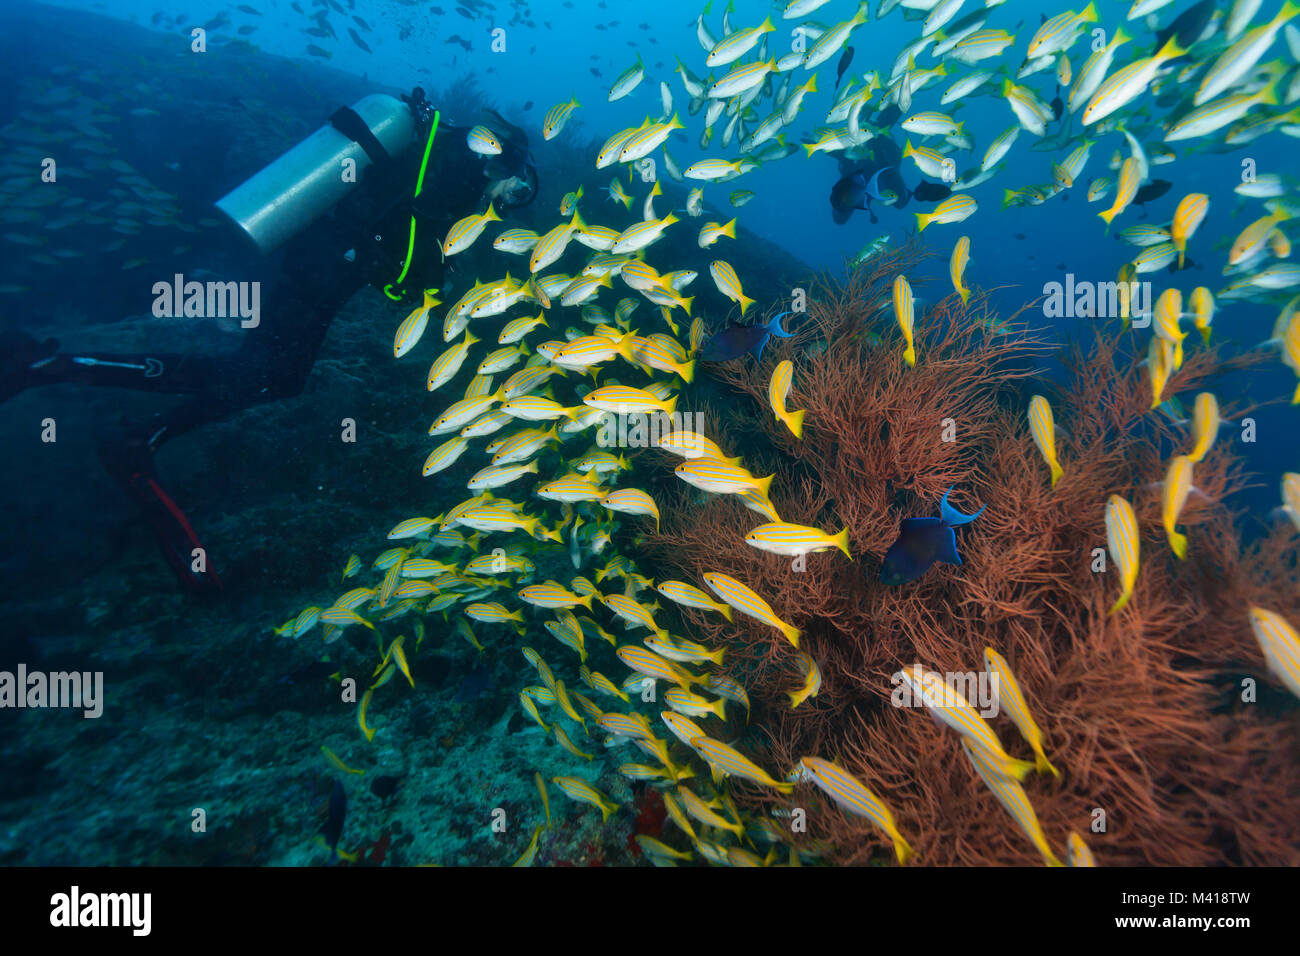 Young woman scuba diver exploring coral reef, underwater activities Stock Photo